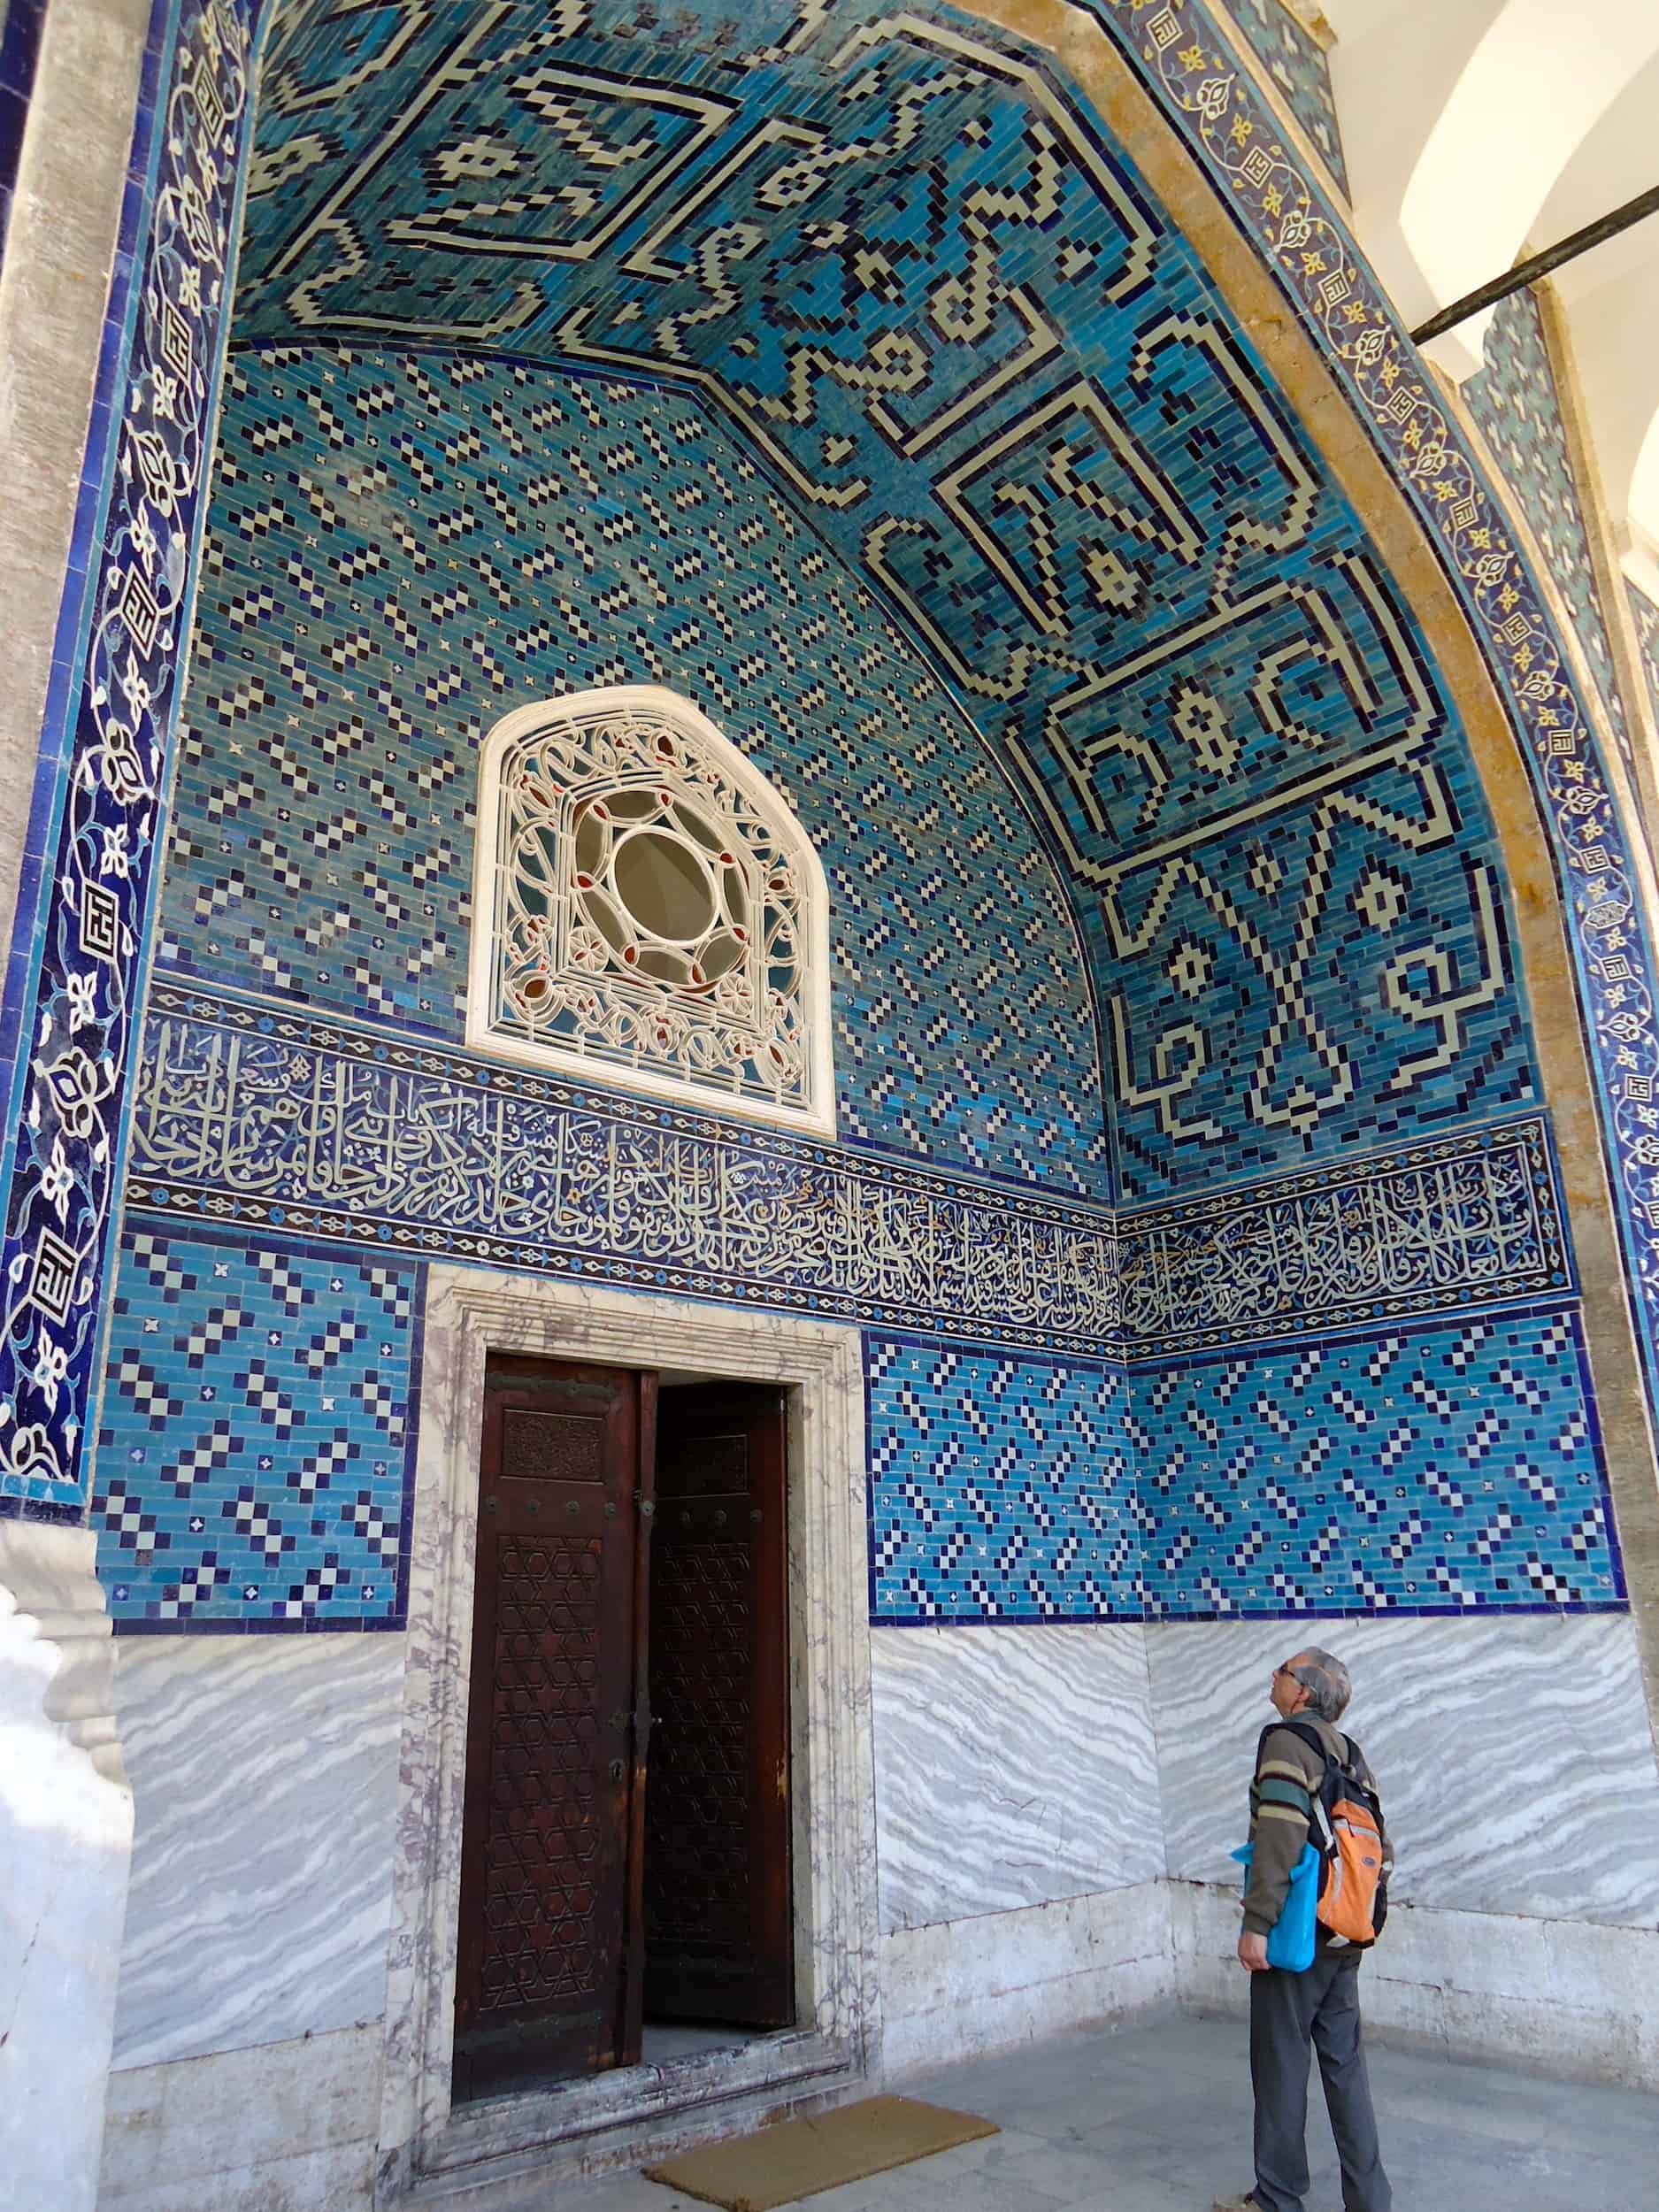 Entrance to the Tiled Kiosk at the Istanbul Archaeology Museums in Istanbul, Turkey